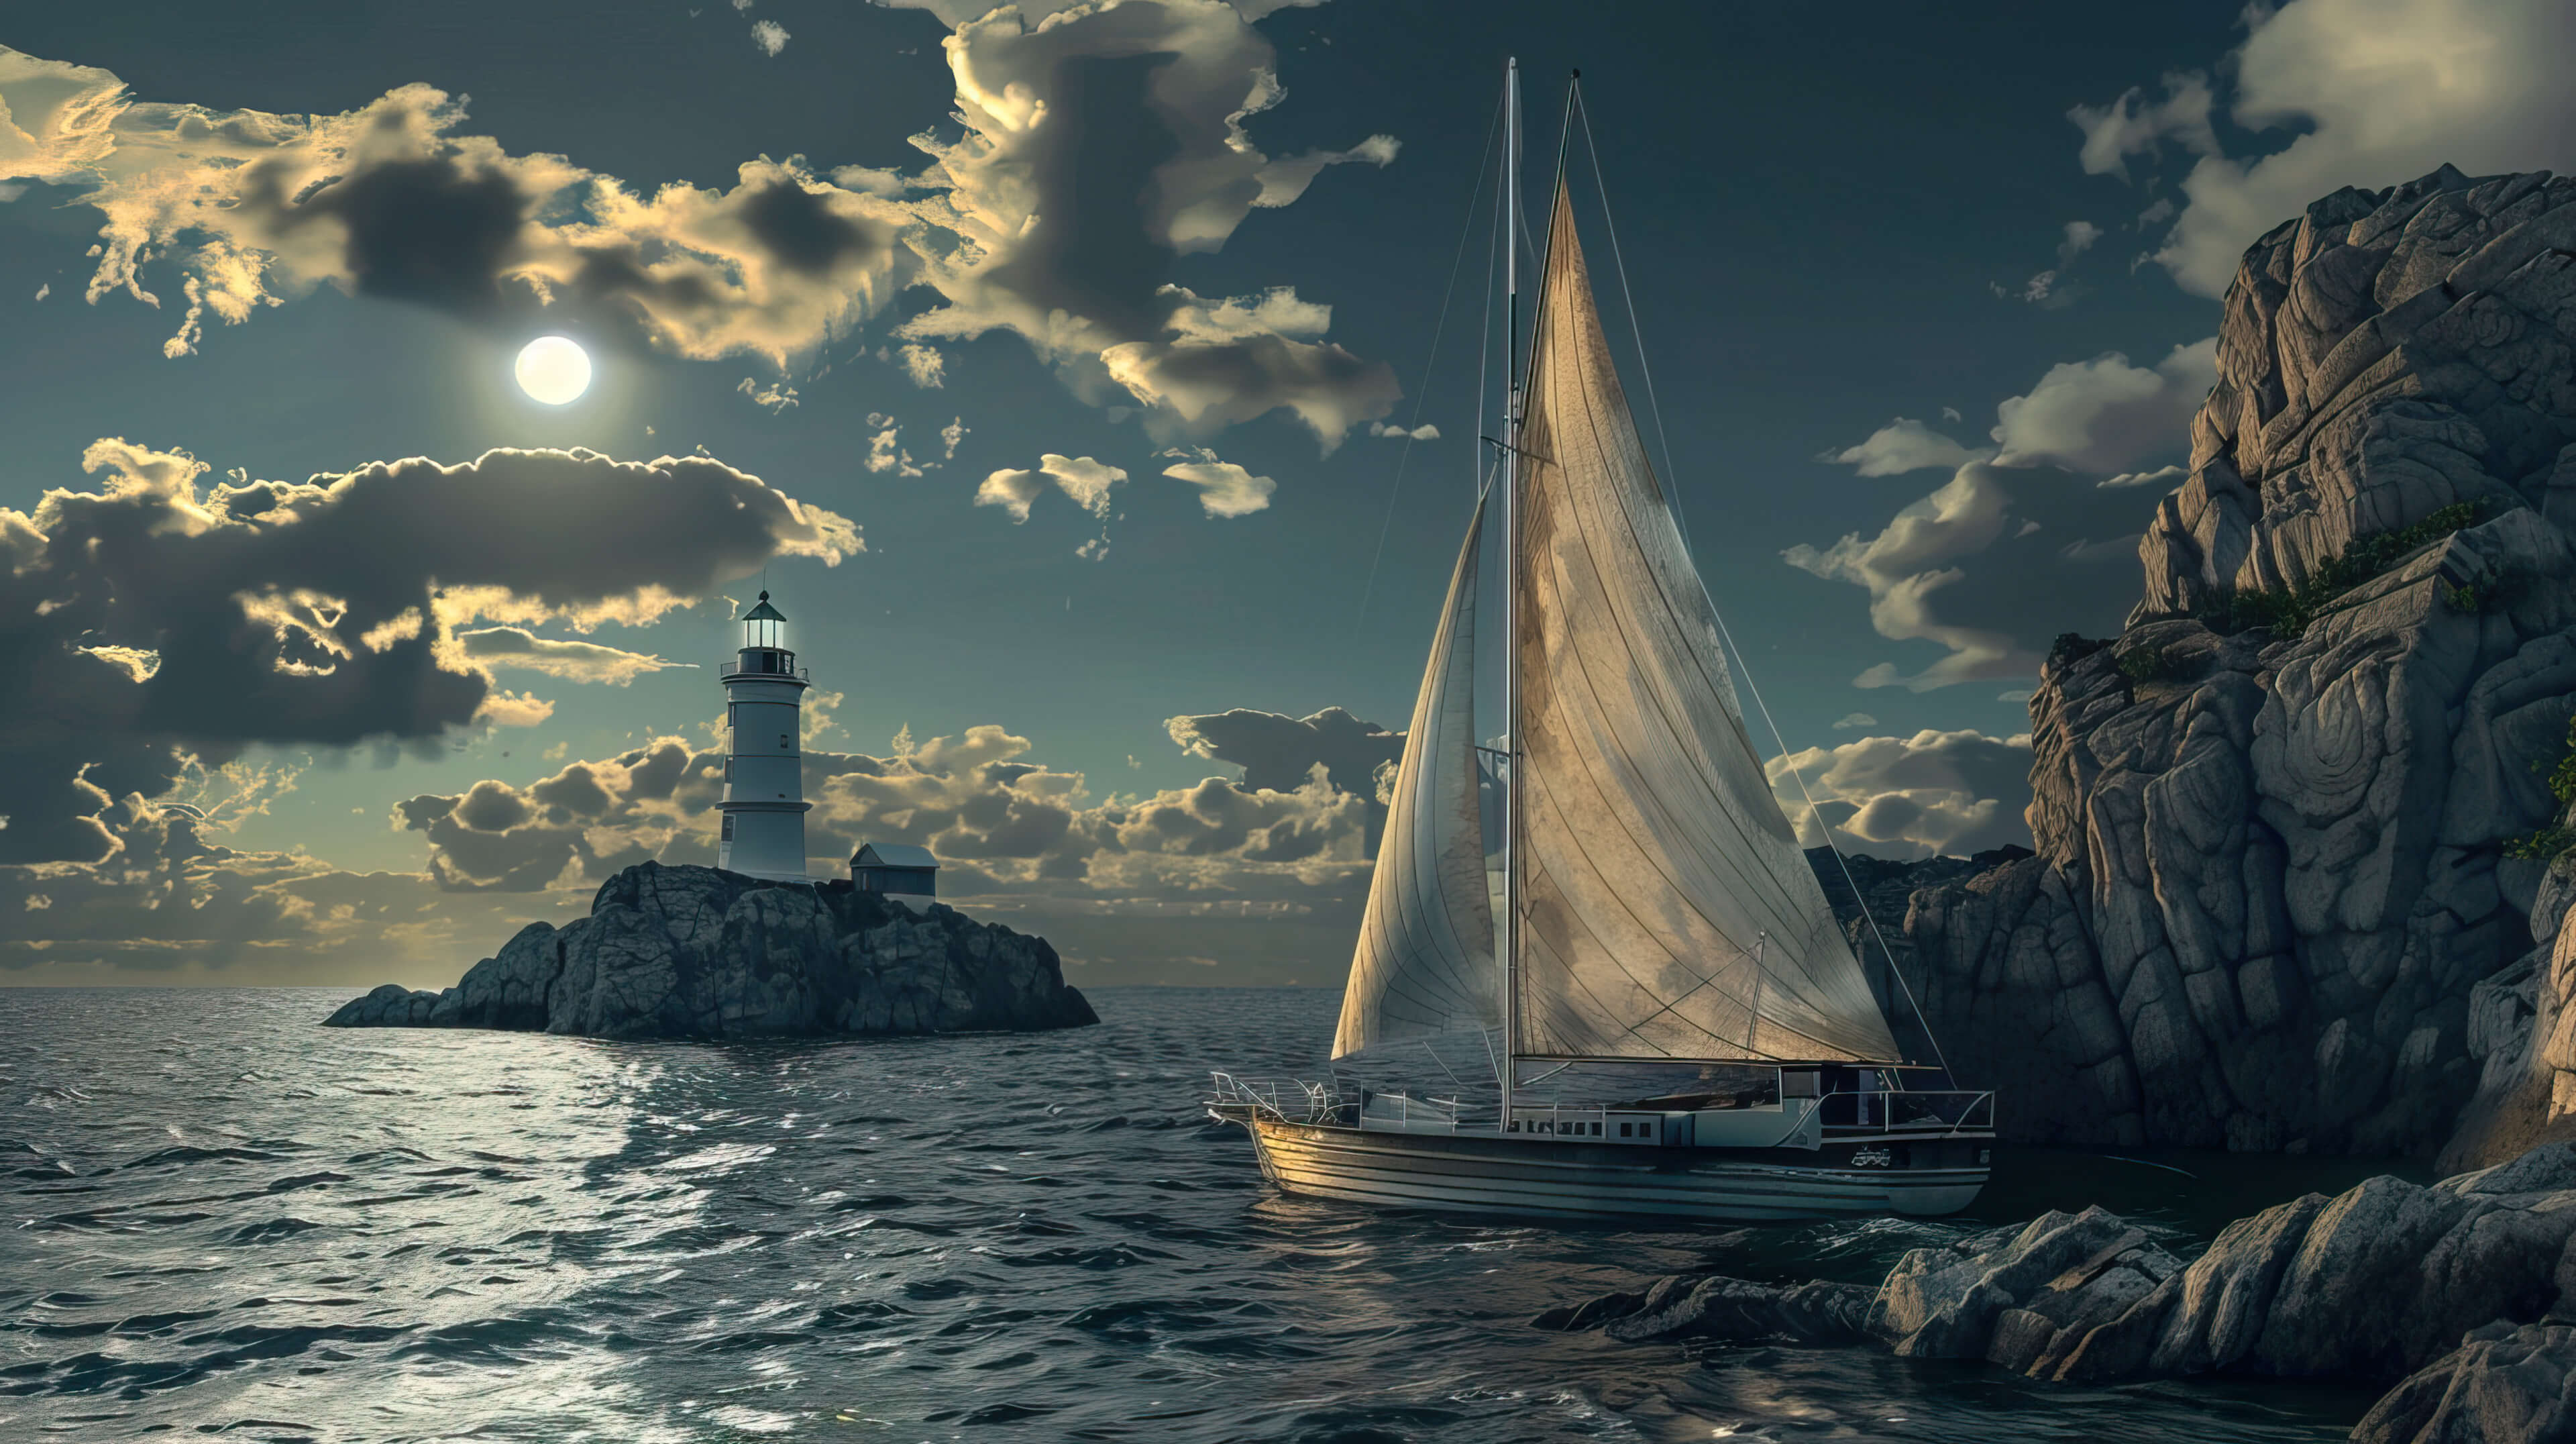 A beautiful wallpaper capturing a vintage sailboat gracefully passing a lighthouse on a rugged shoreline invoking feelings of oceanic history and romance